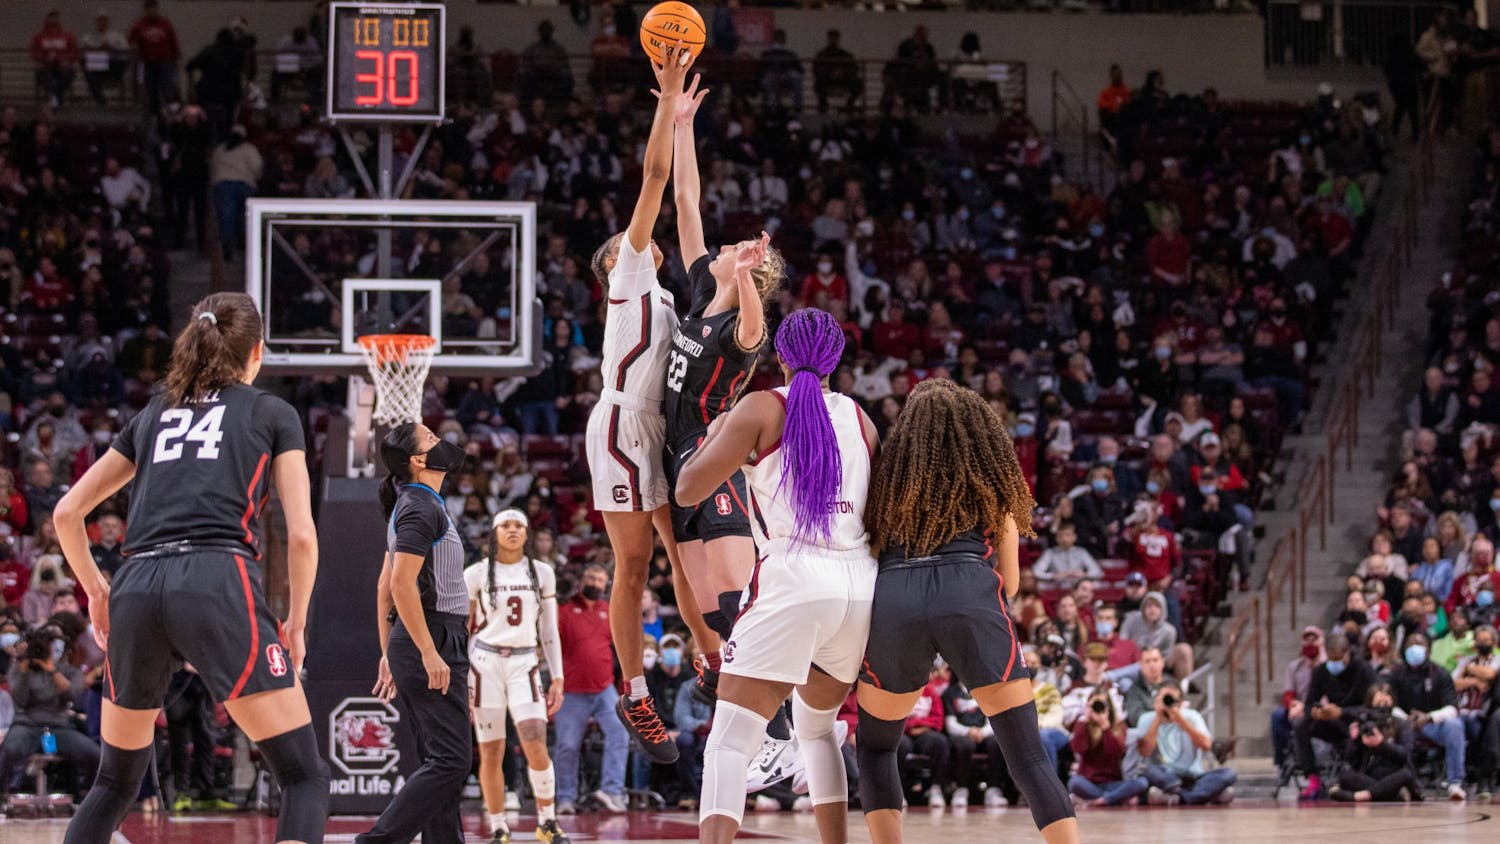 Senior forward Victaria Saxton works to gain possession of the ball during the tip-off on Dec. 22, 2021. The Gamecocks head to Mississippi to battle the Rebels on Jan. 27, 2022